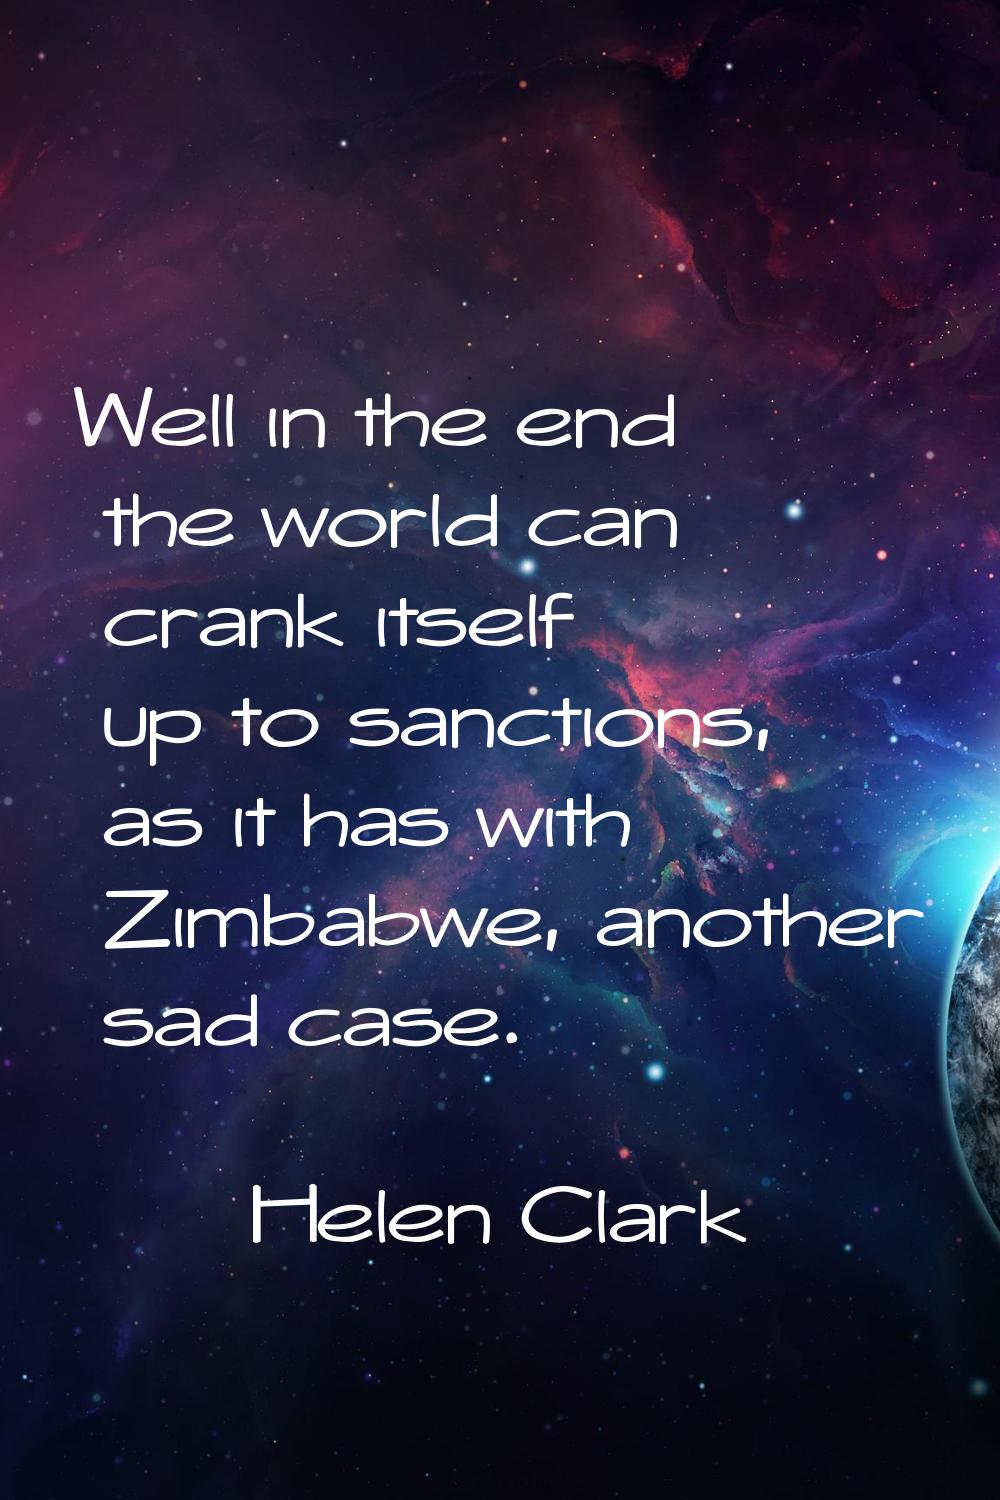 Well in the end the world can crank itself up to sanctions, as it has with Zimbabwe, another sad ca